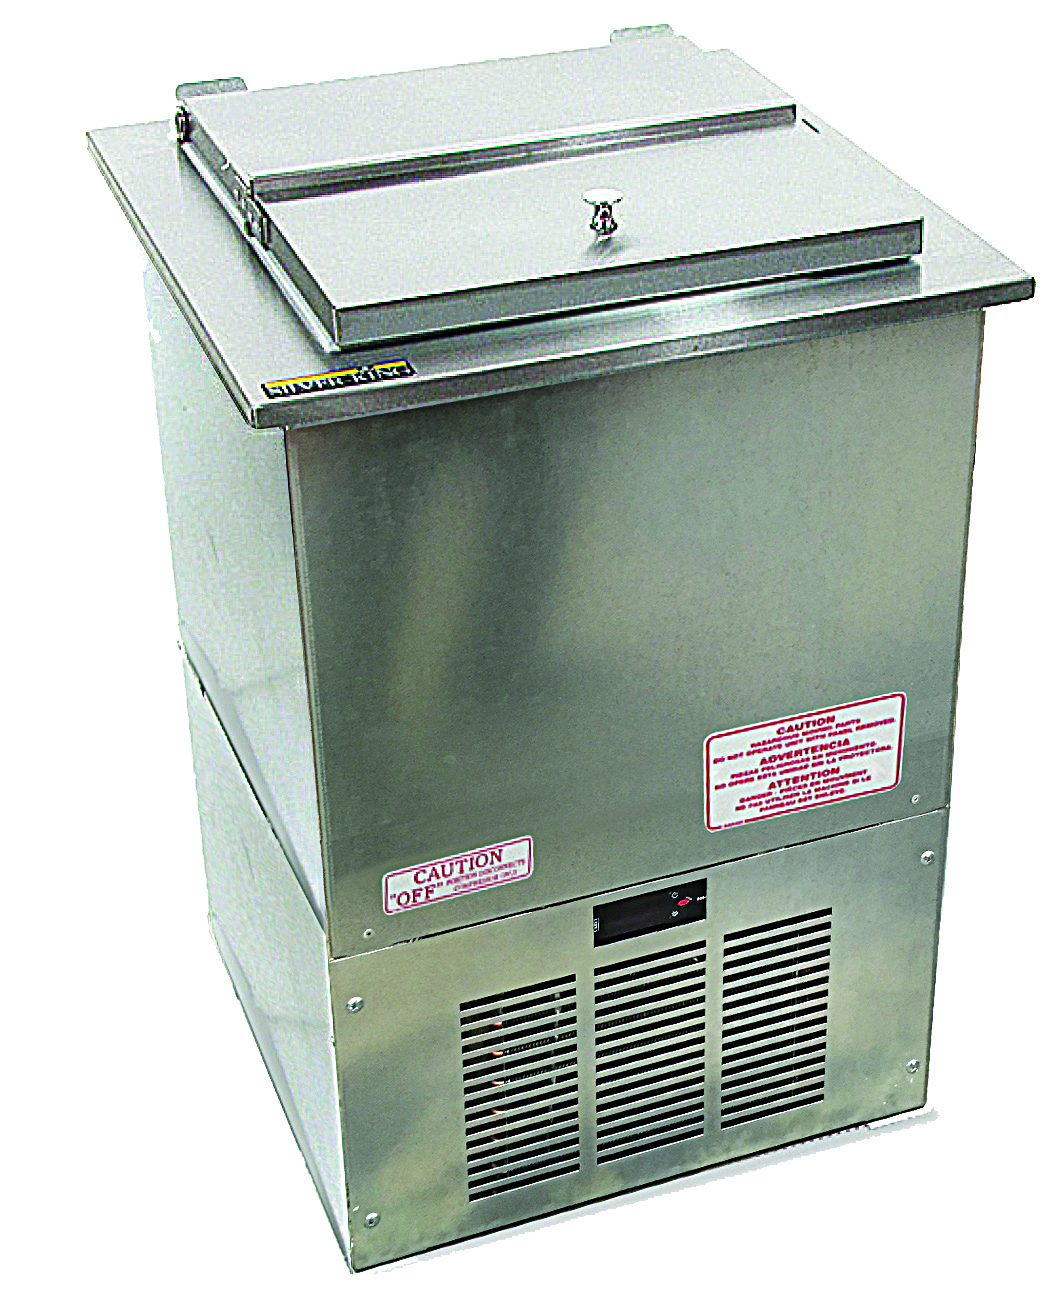 Food Service Machinery Product Categories Hatco Corporation